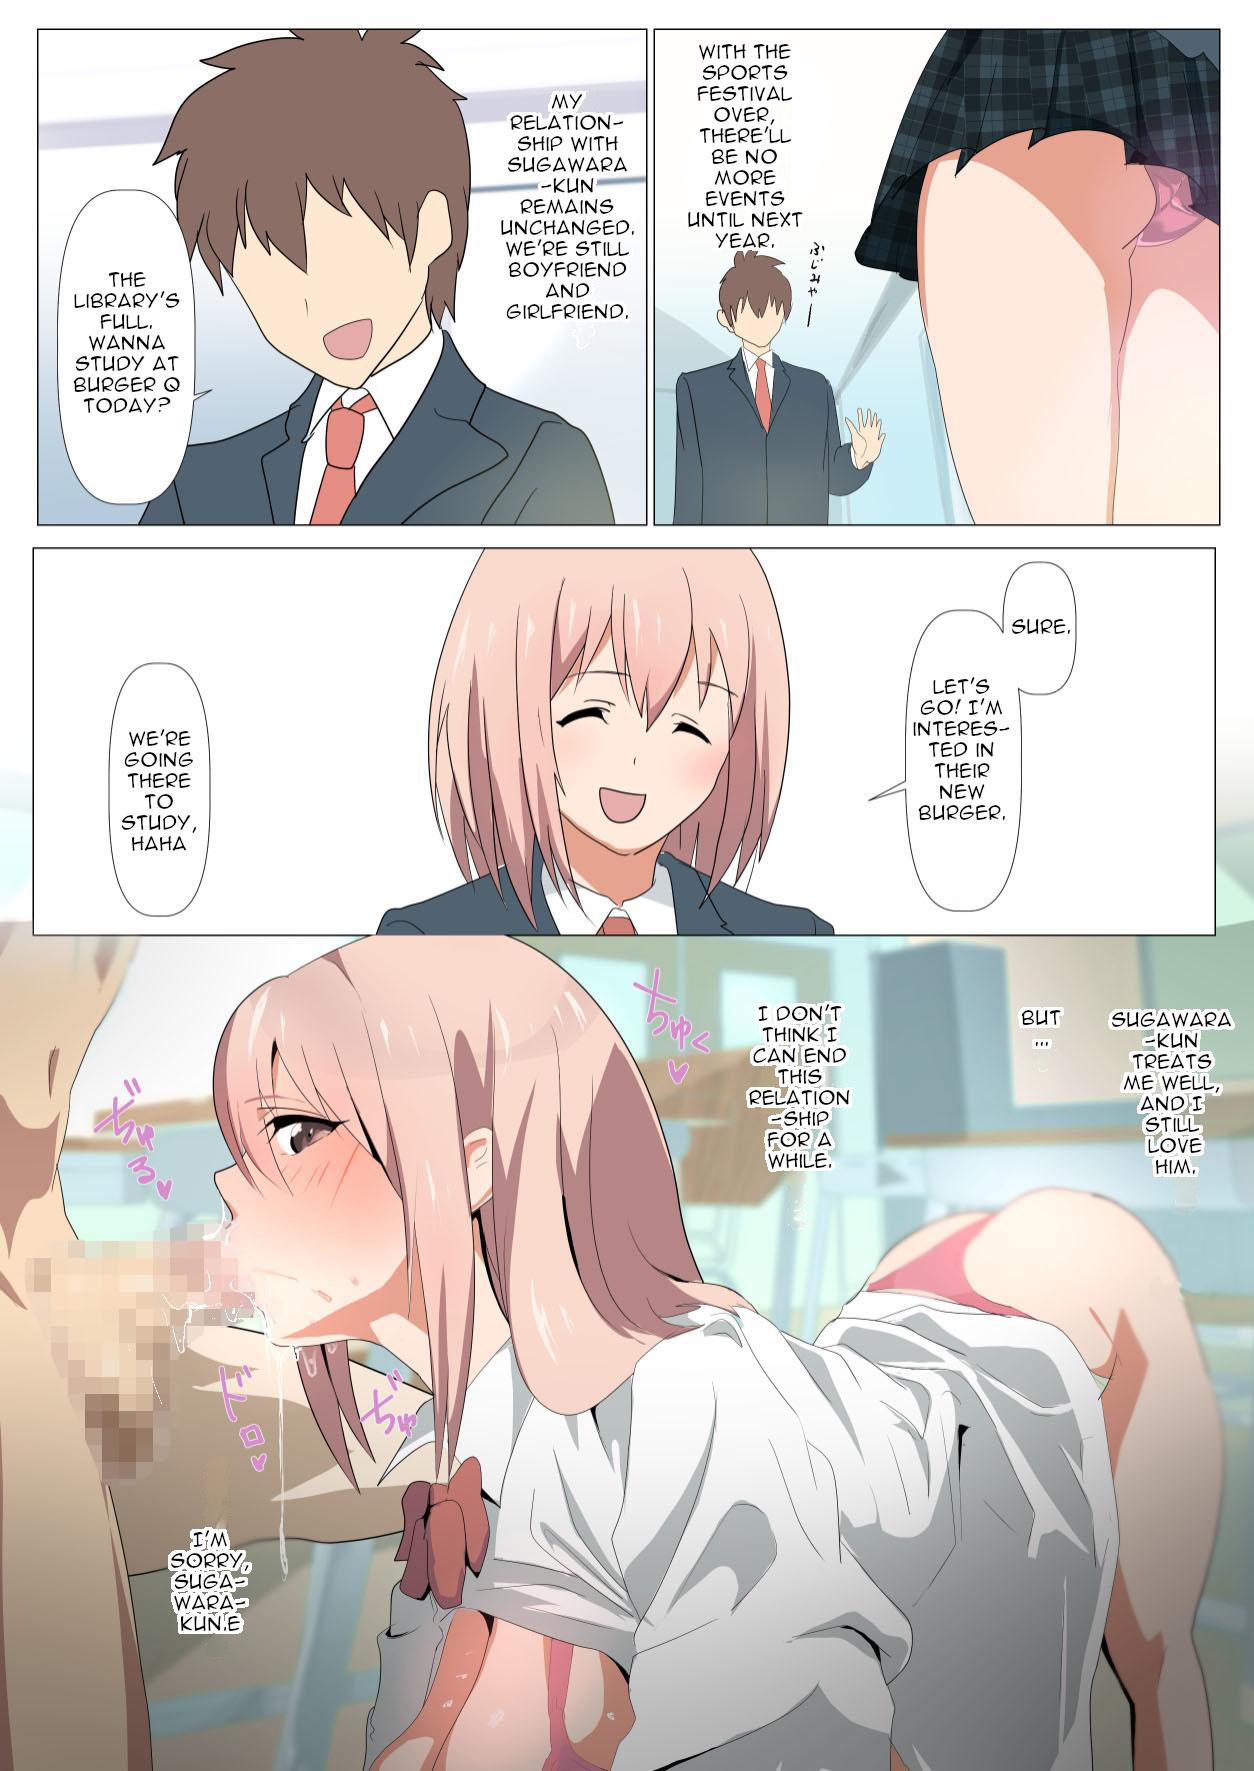 First The Day the Ribbon Fell ~ How I was NTR'd by a Playboy in my Class without My Childhood Friend Knowing - Original Nerd - Page 42